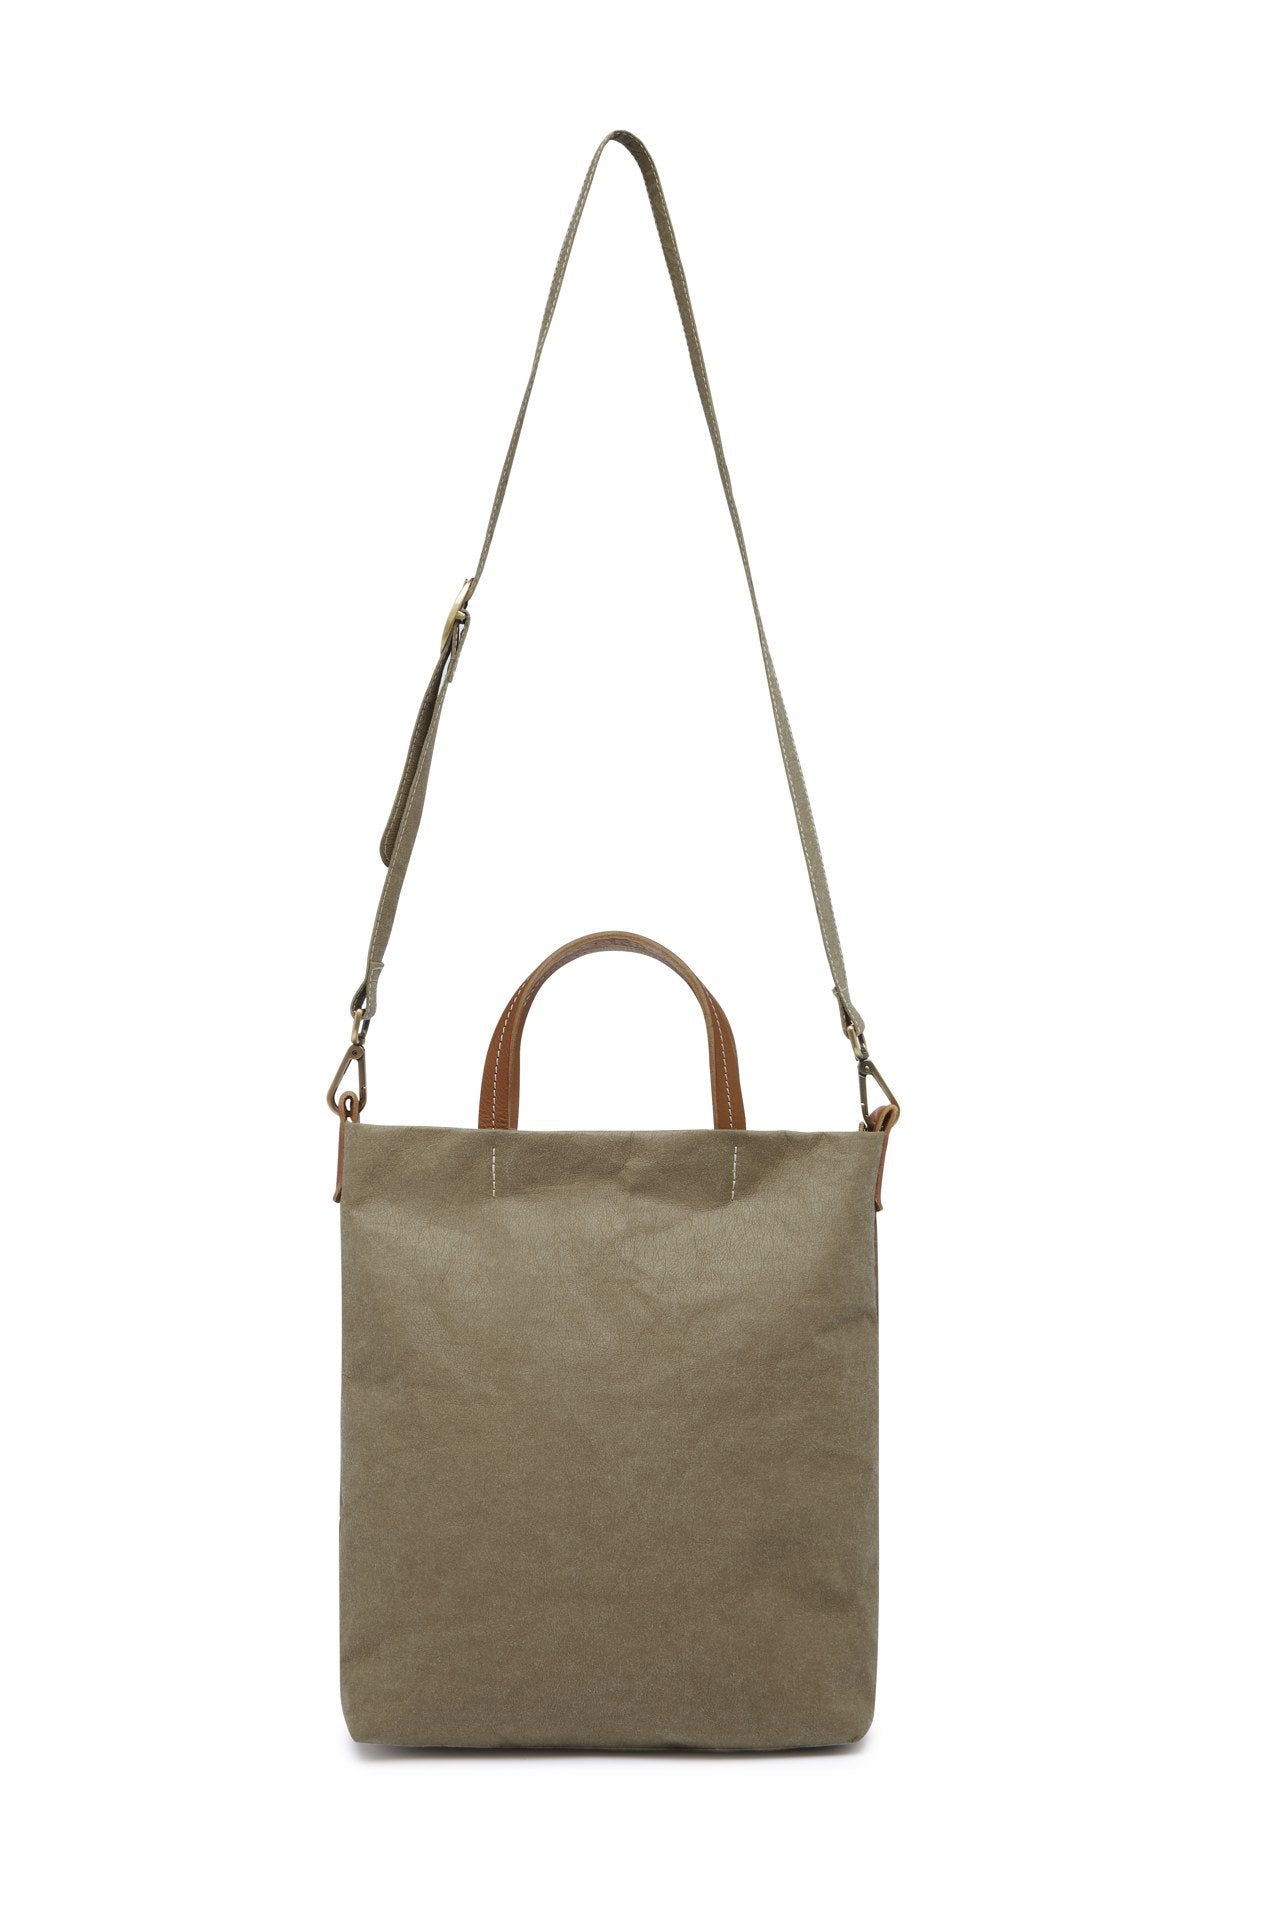 A washable paper tote is shown with a long shoulder strap pointing skywards. It has two top handles and is khaki in colour.